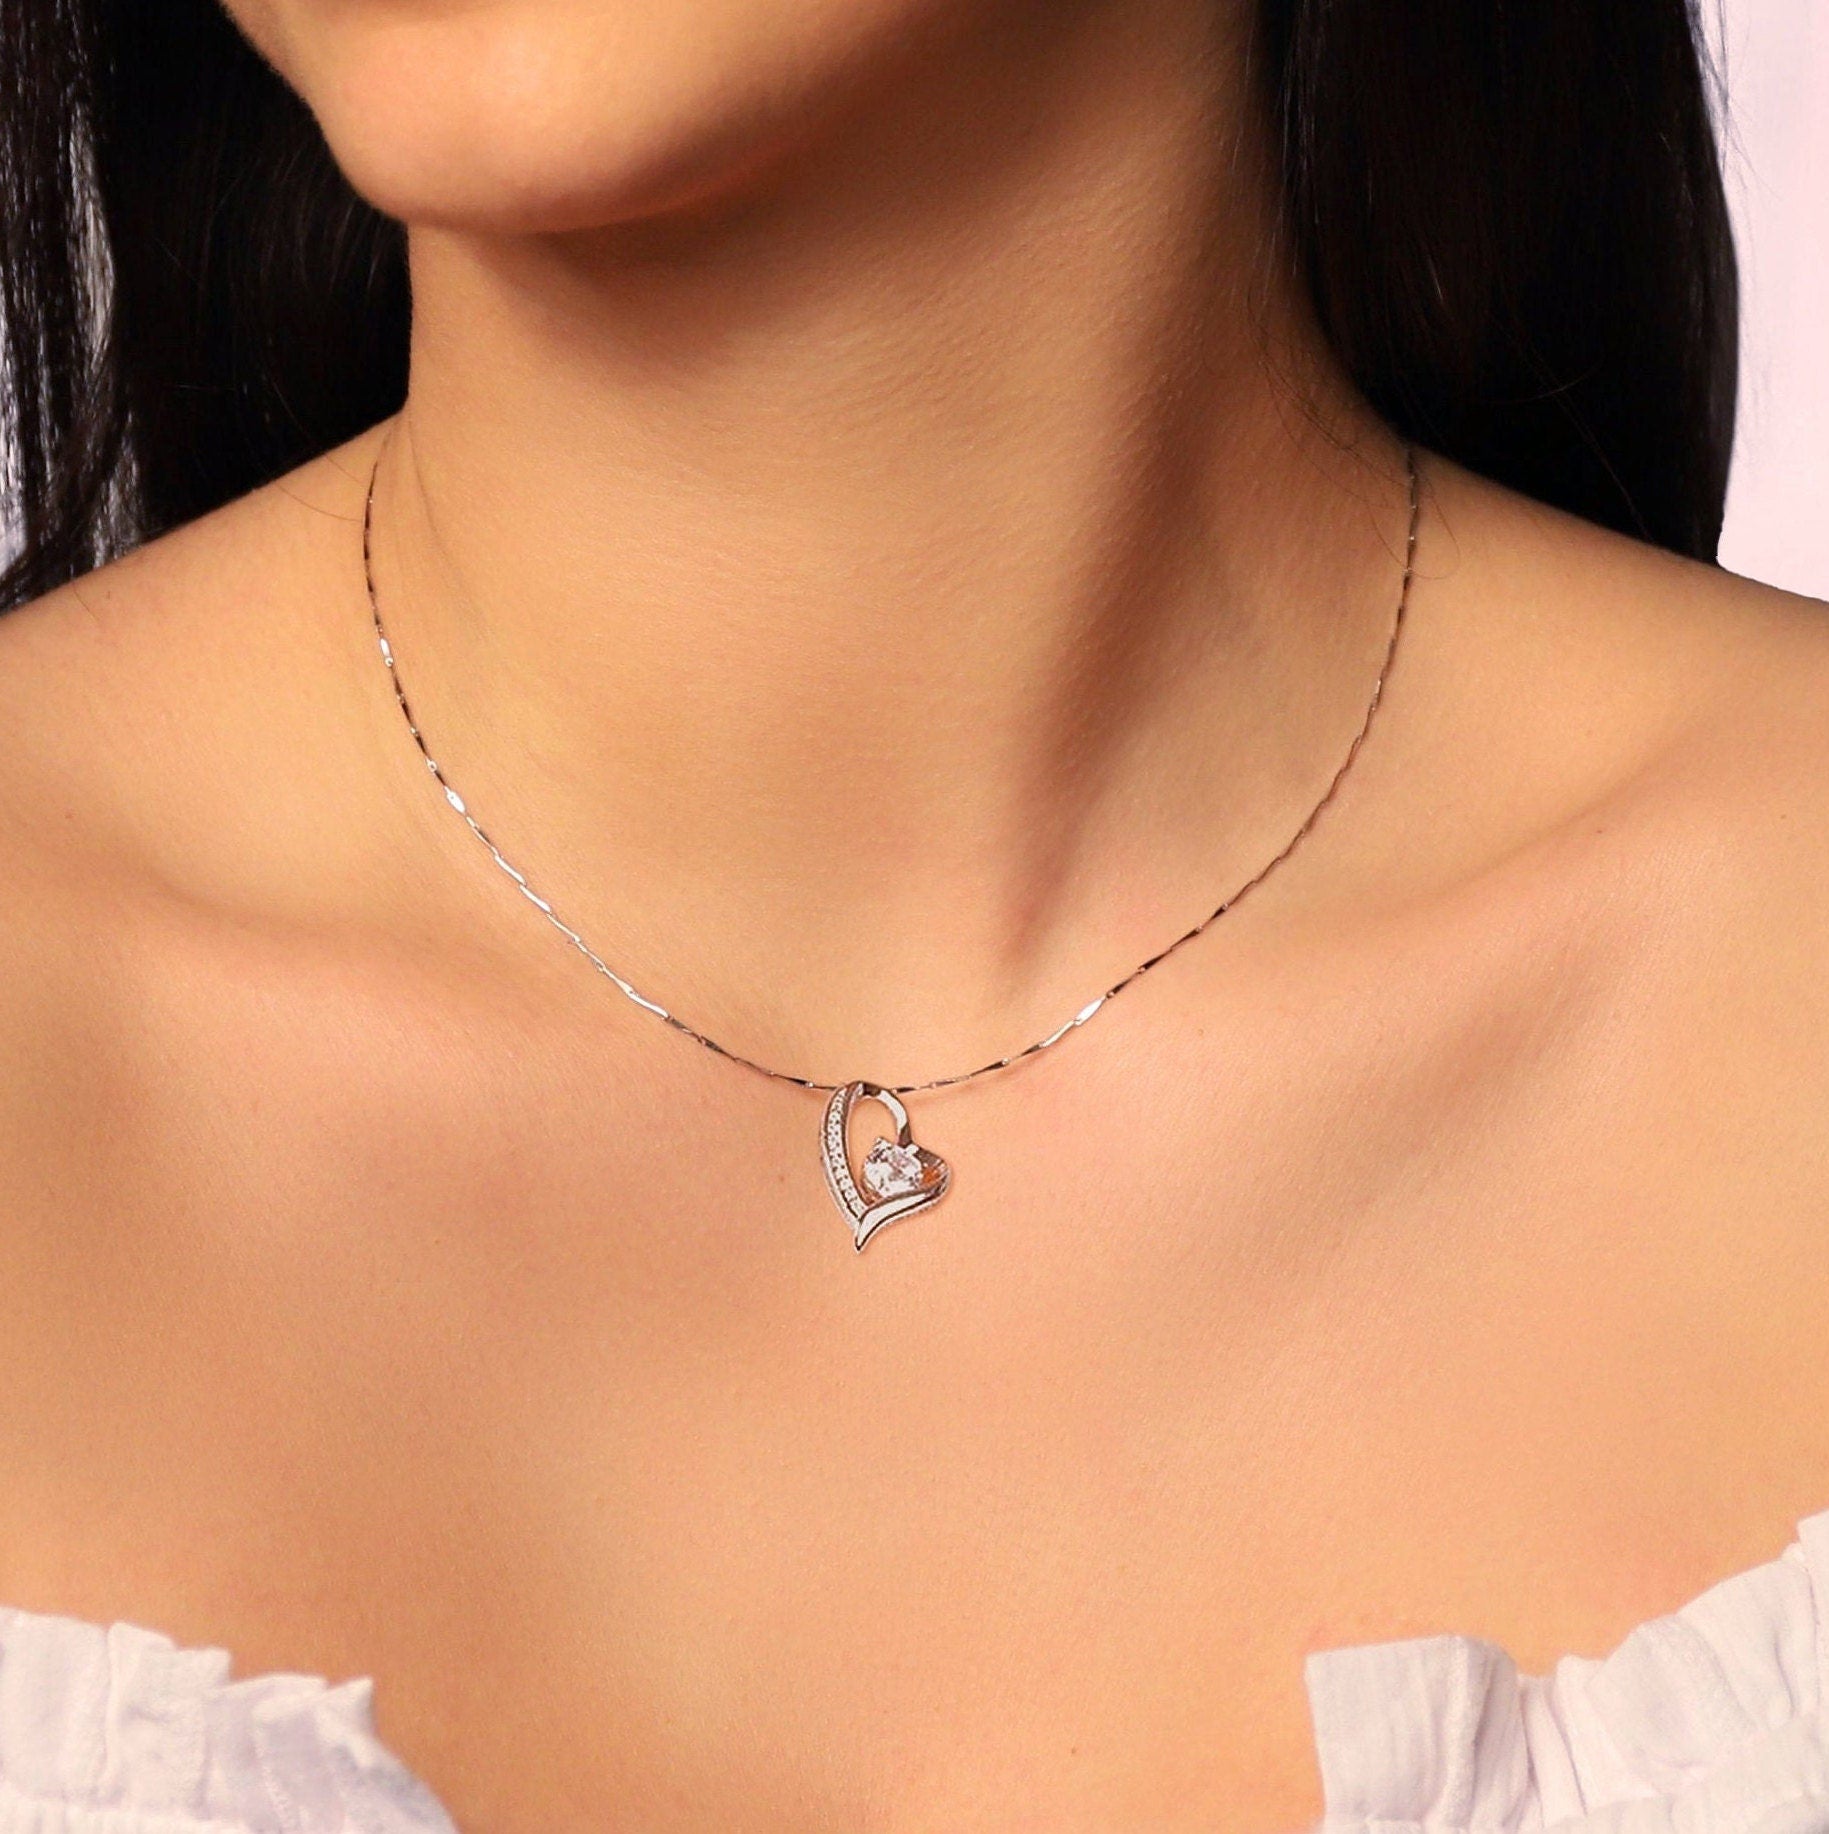 CERYS - Delicate Dazzling Heart Style Necklaces •Link Chain • Choker Necklace, Satellite Necklace, Dainty Necklace, Layering Beaded Chain,